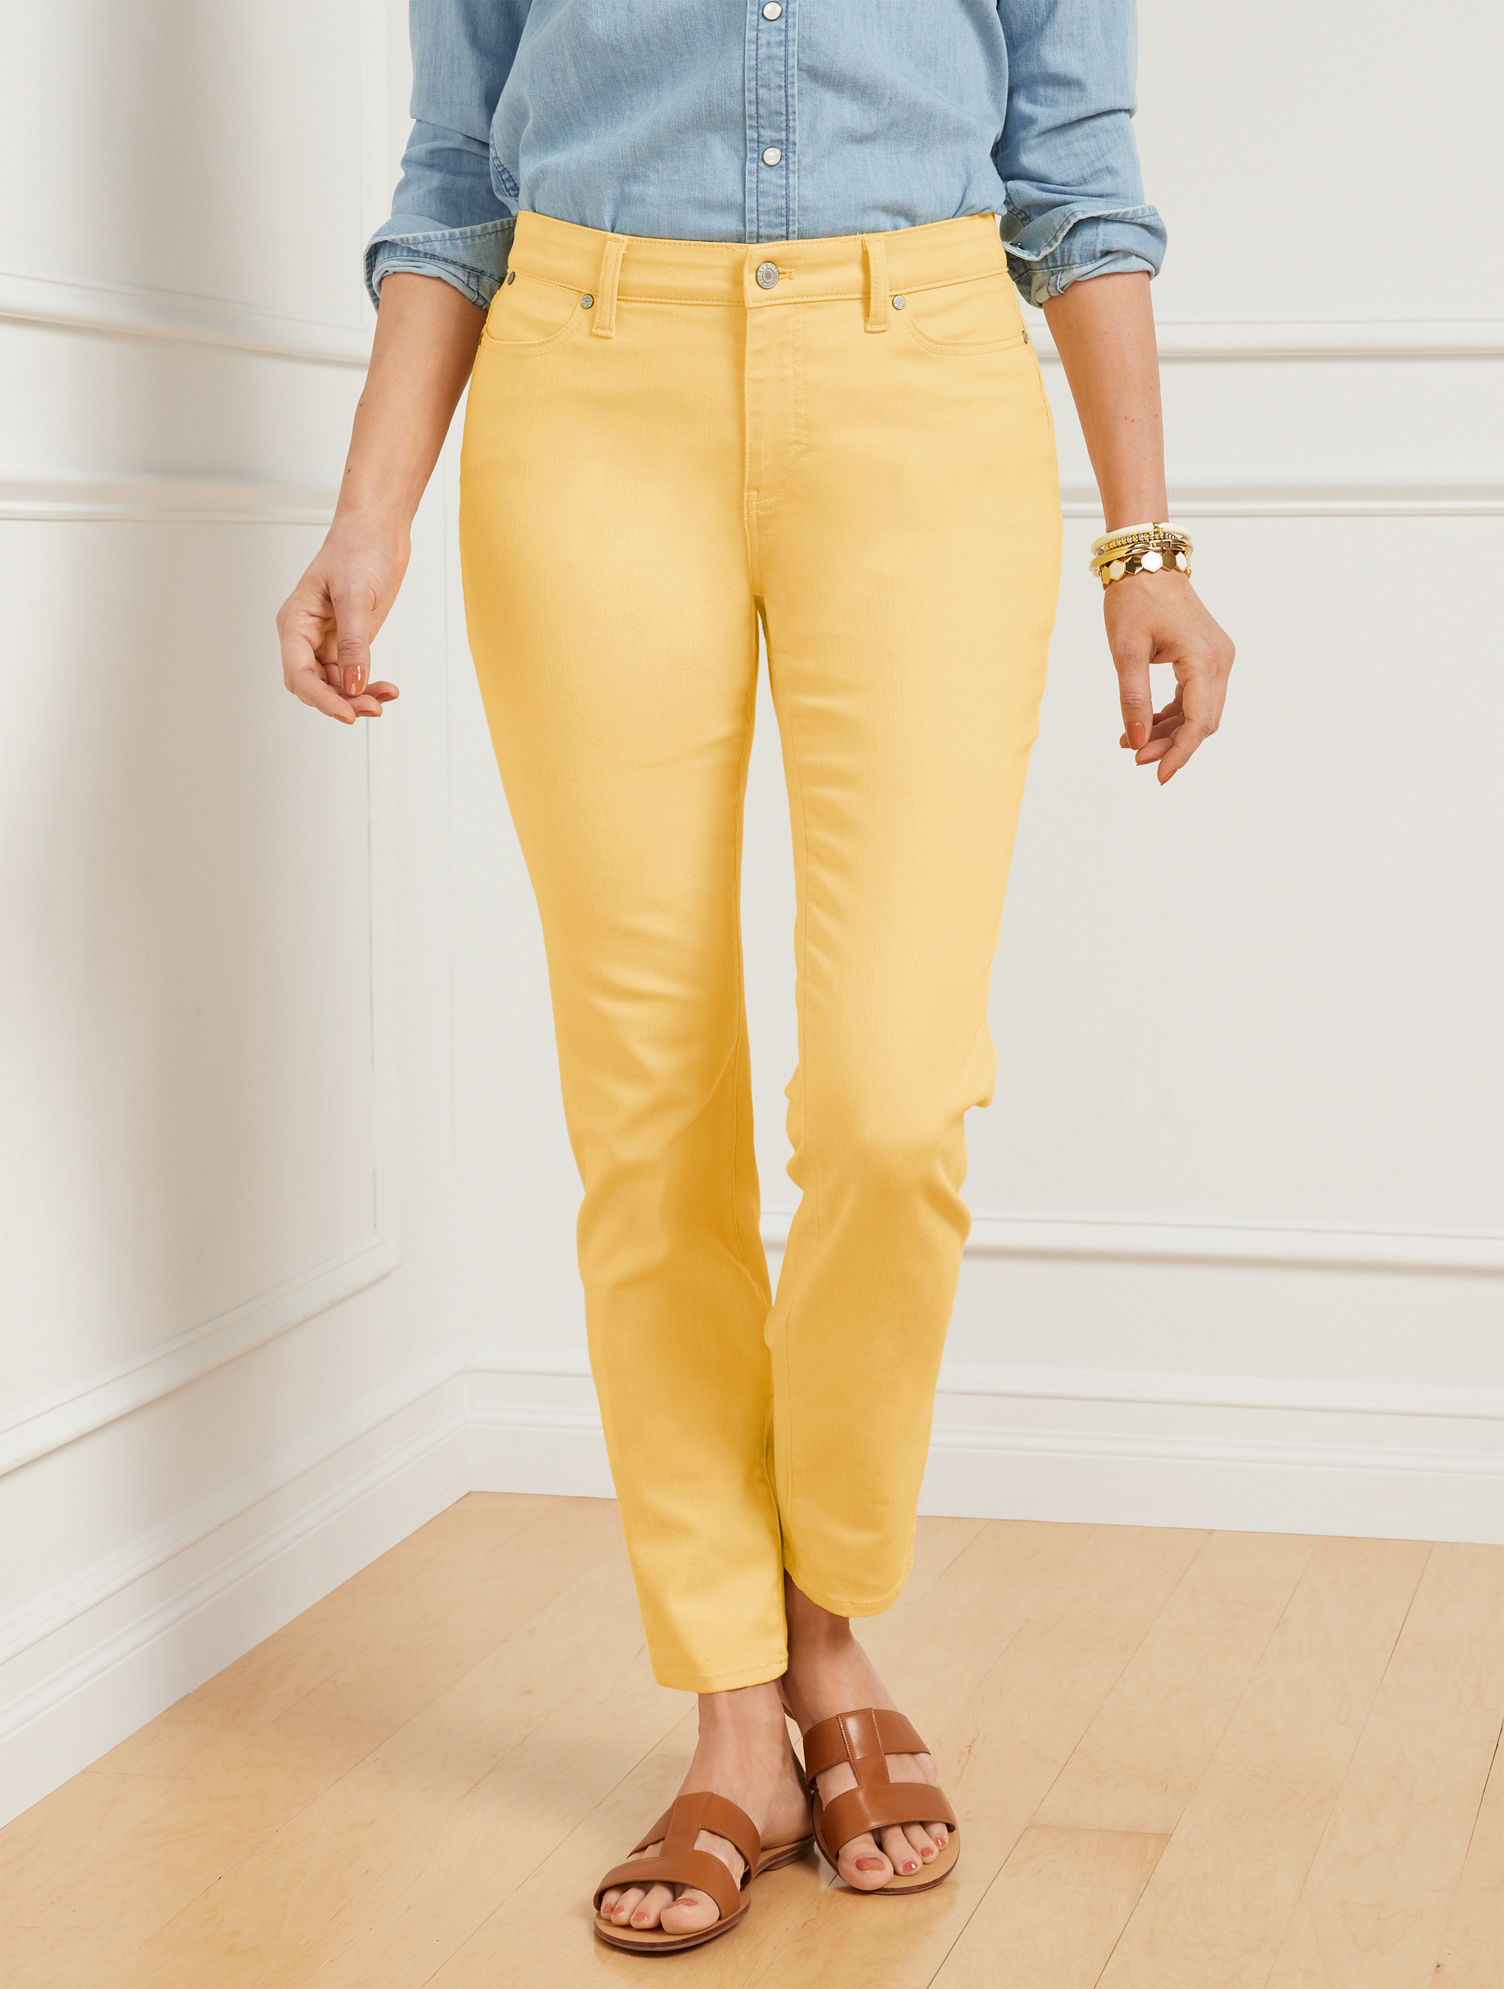 Talbots Slim Ankle Jeans - Colors - Daisy - 22